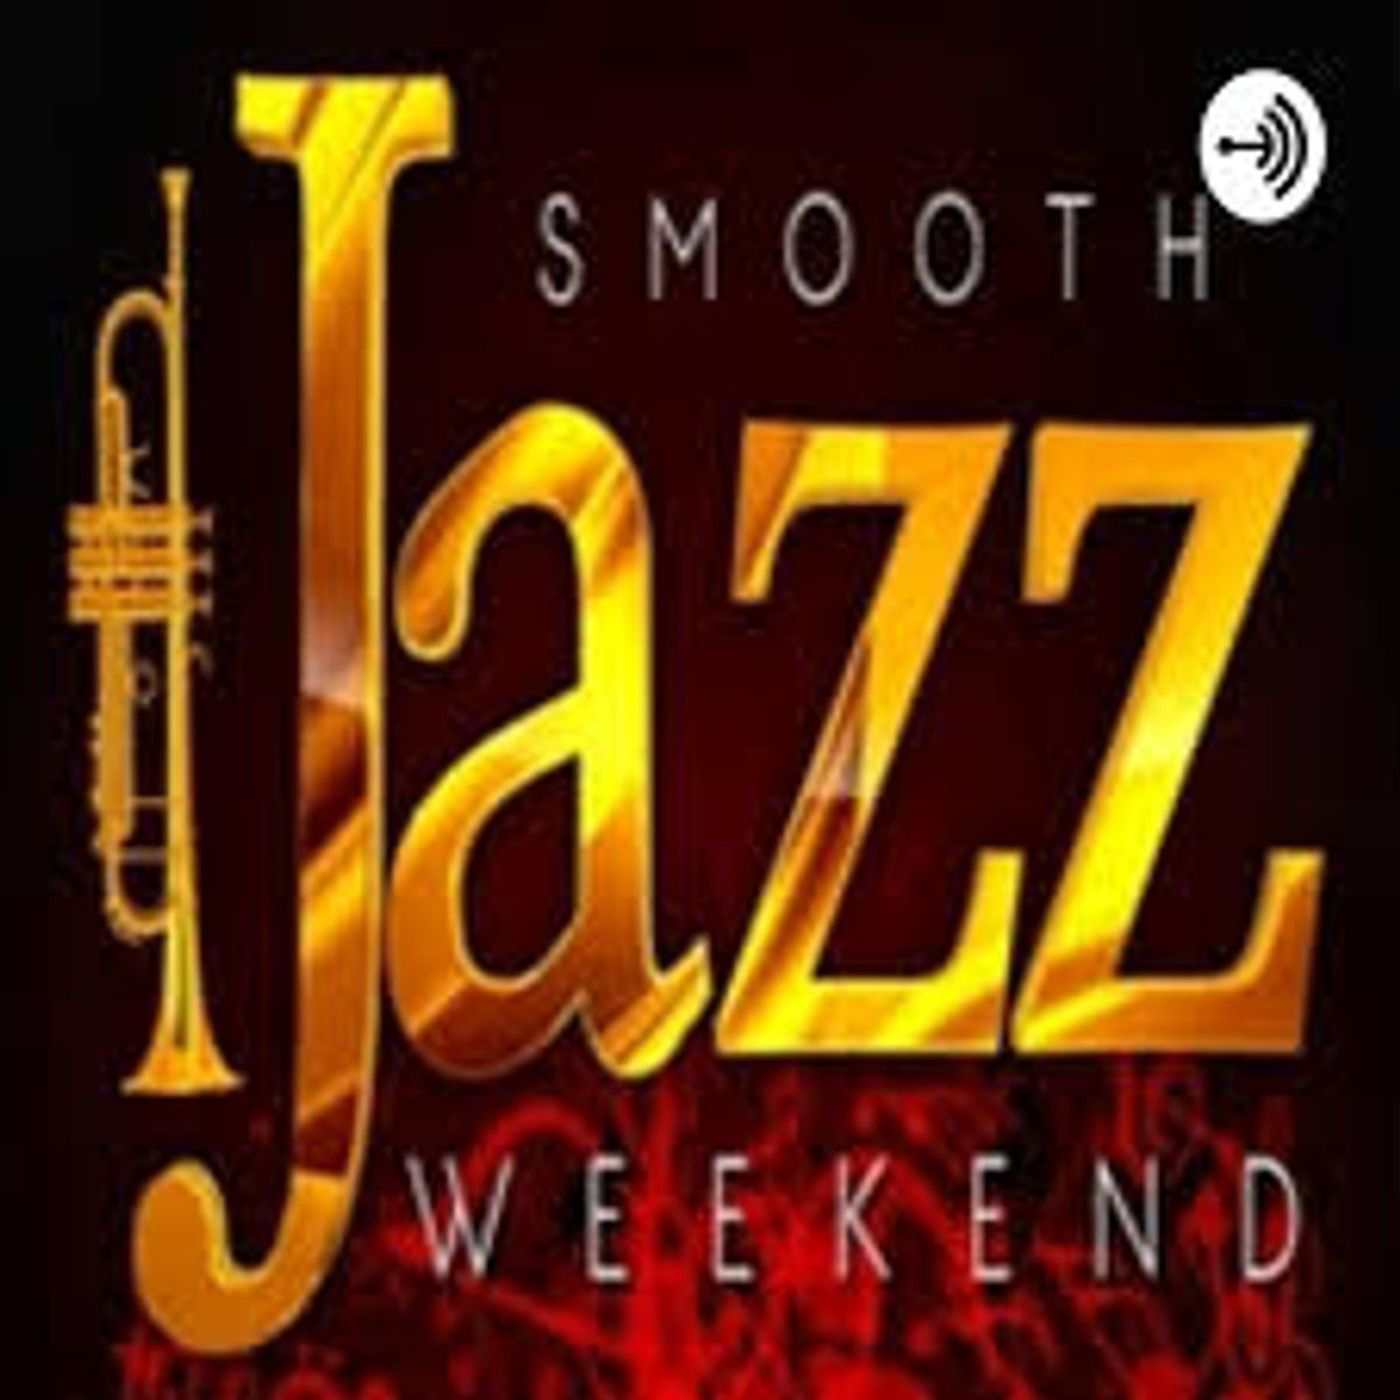 A highlight from Smooth Jazz Weekend with Tina E. (Make You Smile)